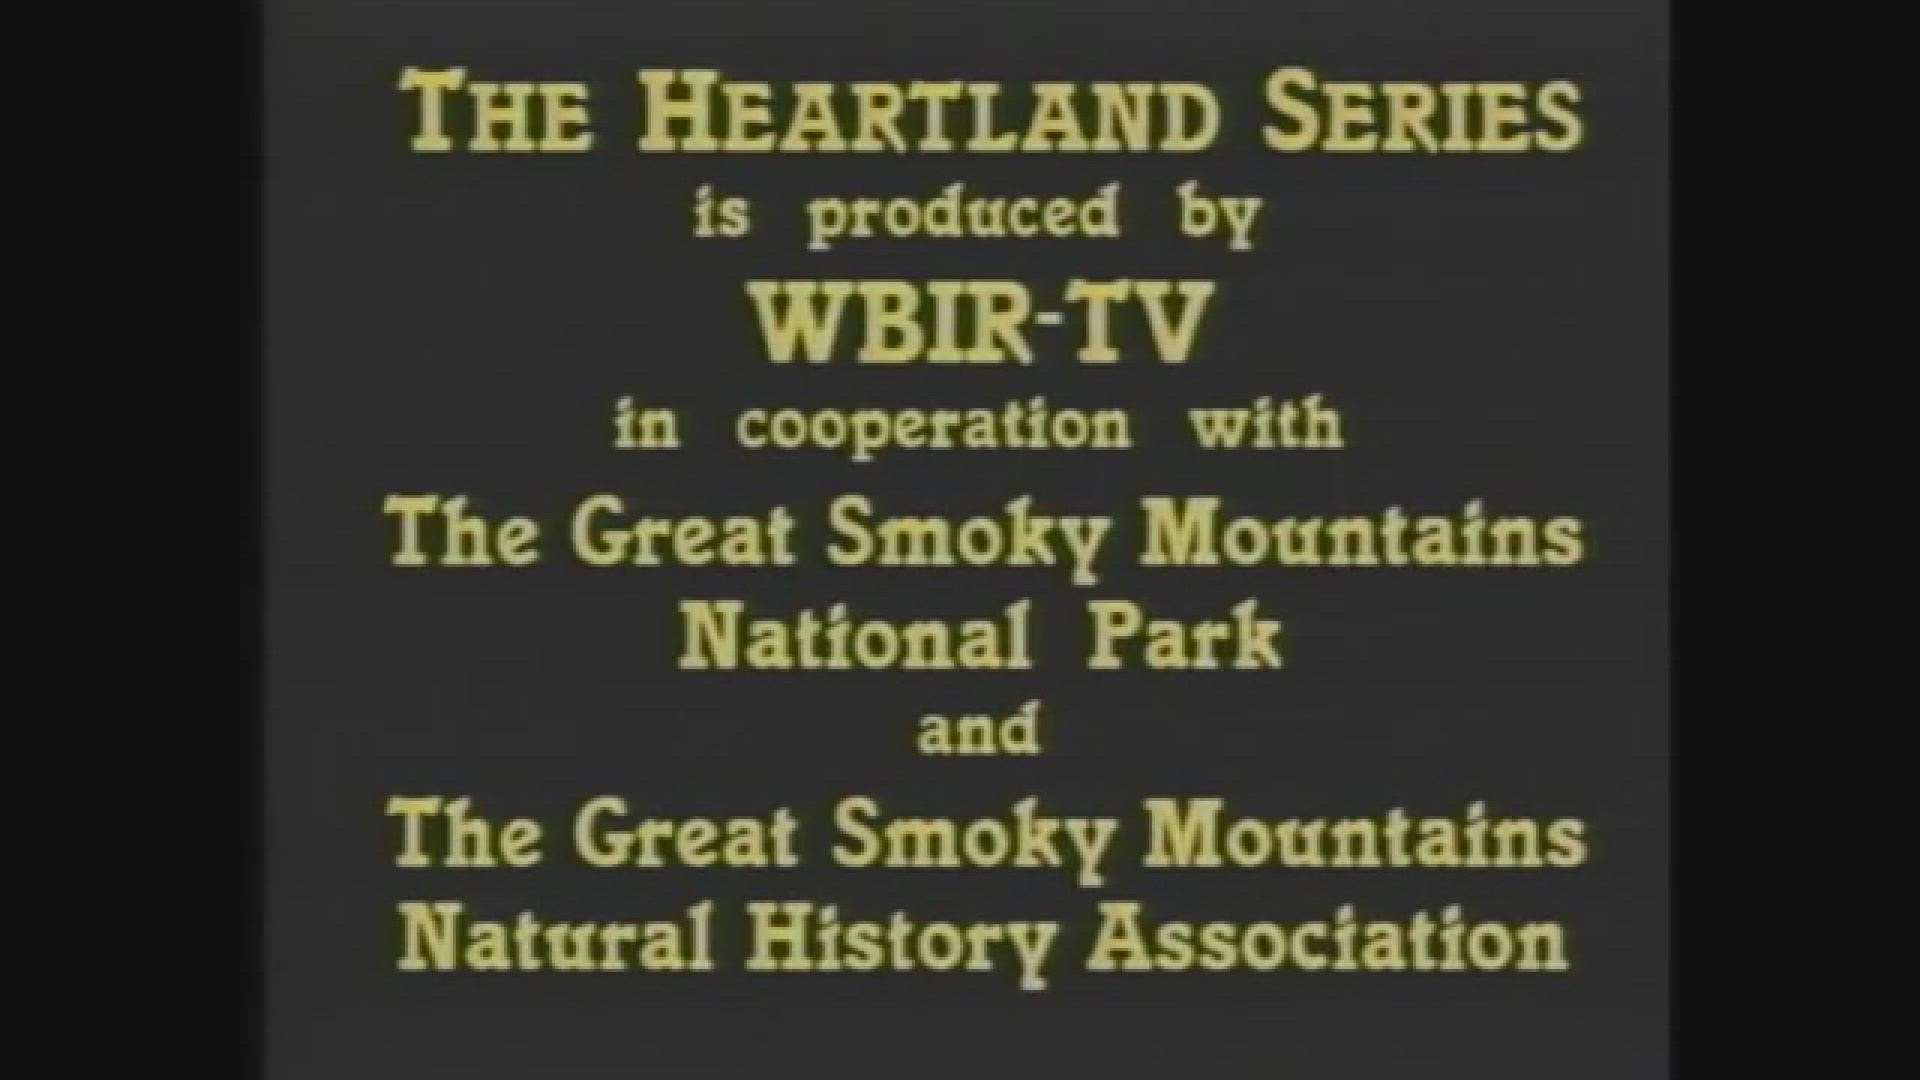 WBIR Channel 10's 'The Heartland Series' hosted by Bill Landry aired from 1984 to 2009. We hope you enjoy these captivating windows into East Tennessee history.